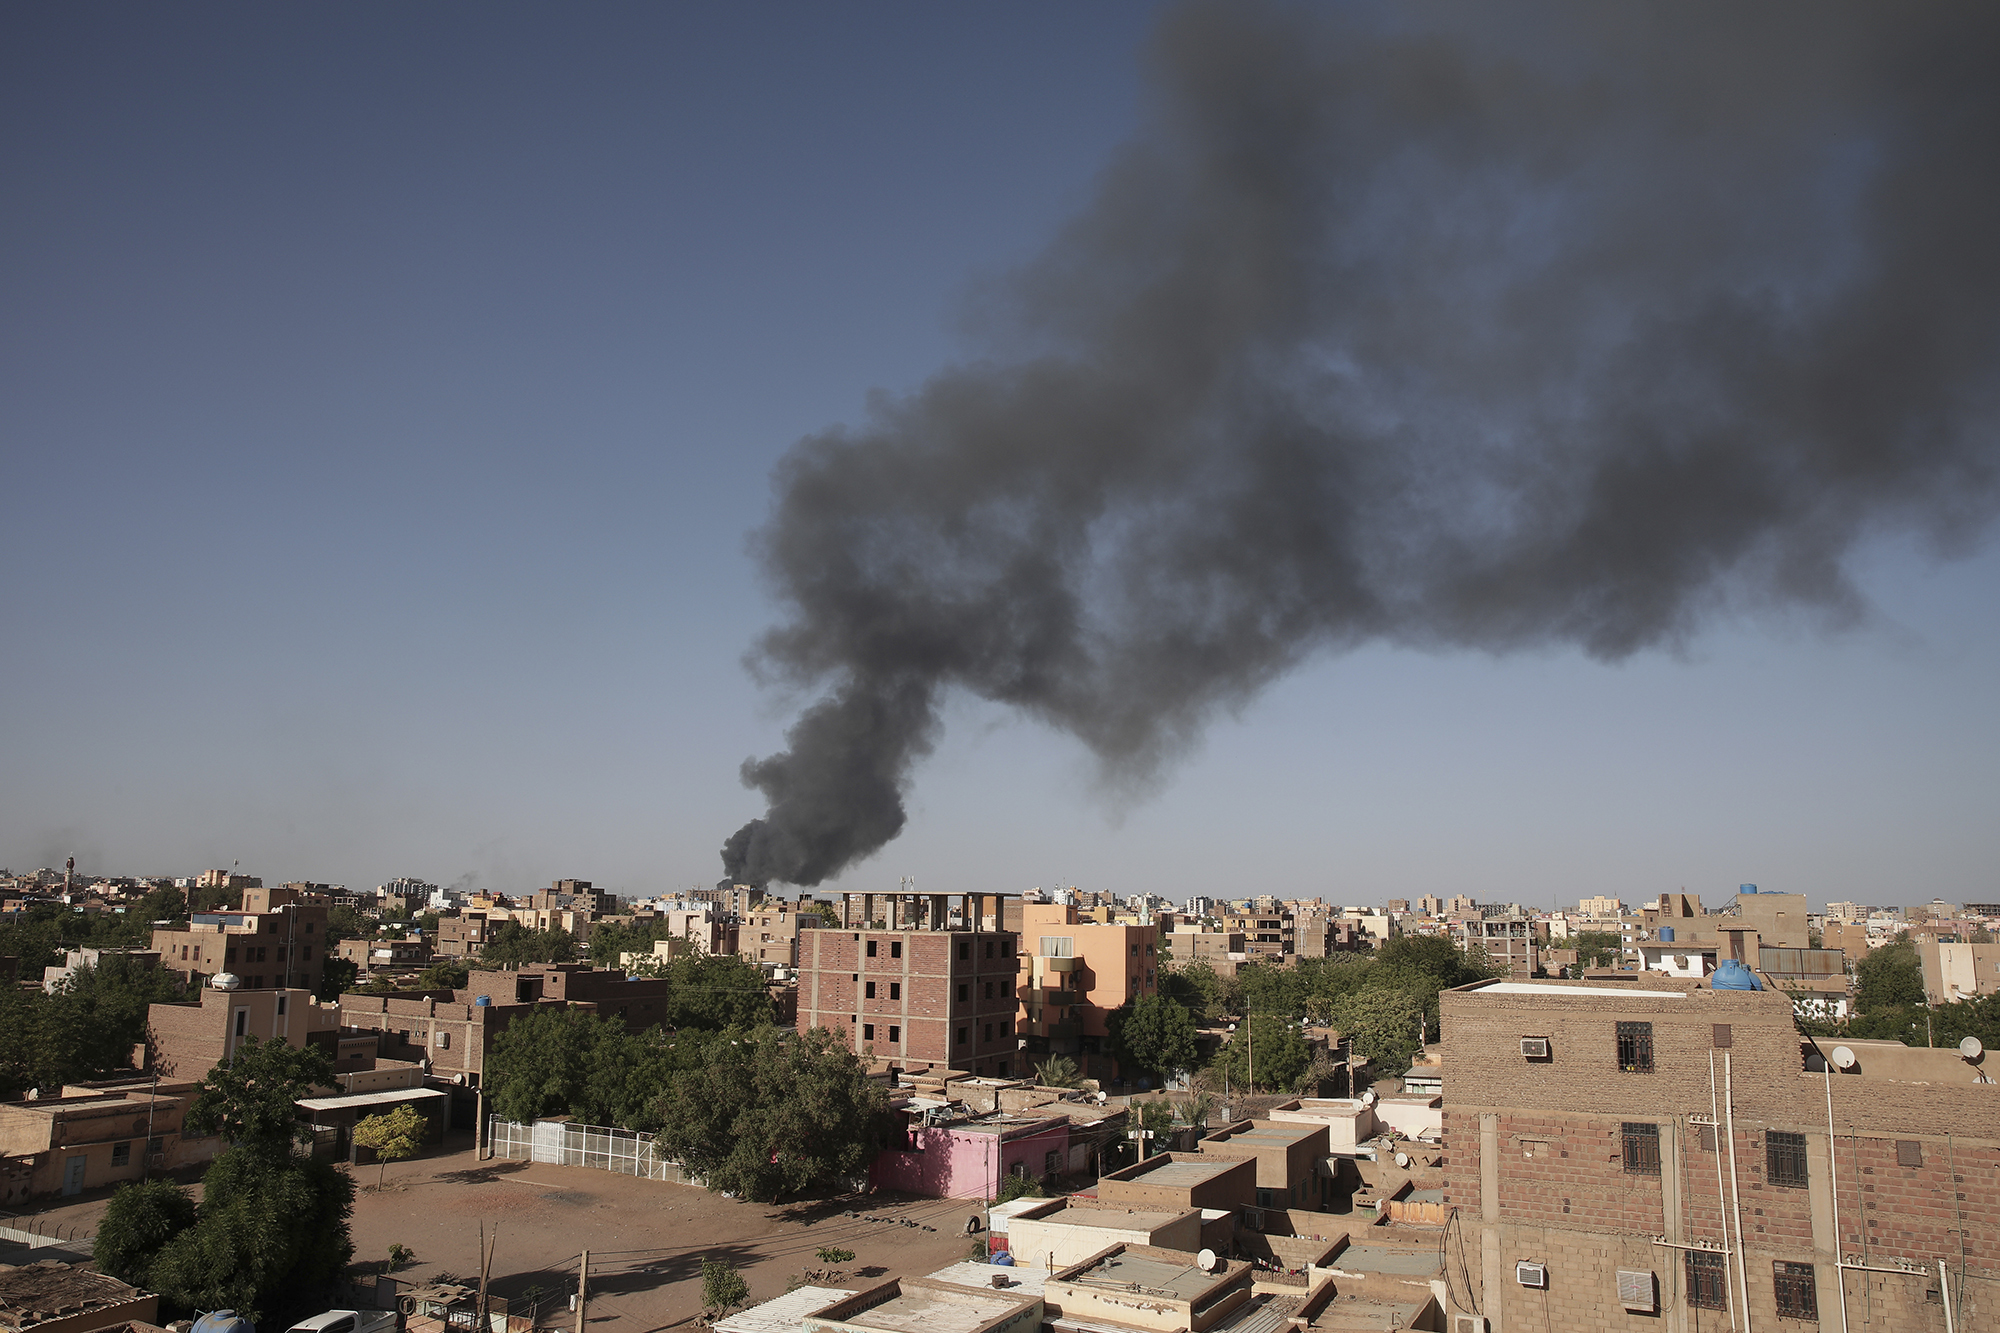 A view of the Sudanese capital of Khartoum shows brown buildings and dark grey smoke billowing against a blue sky.